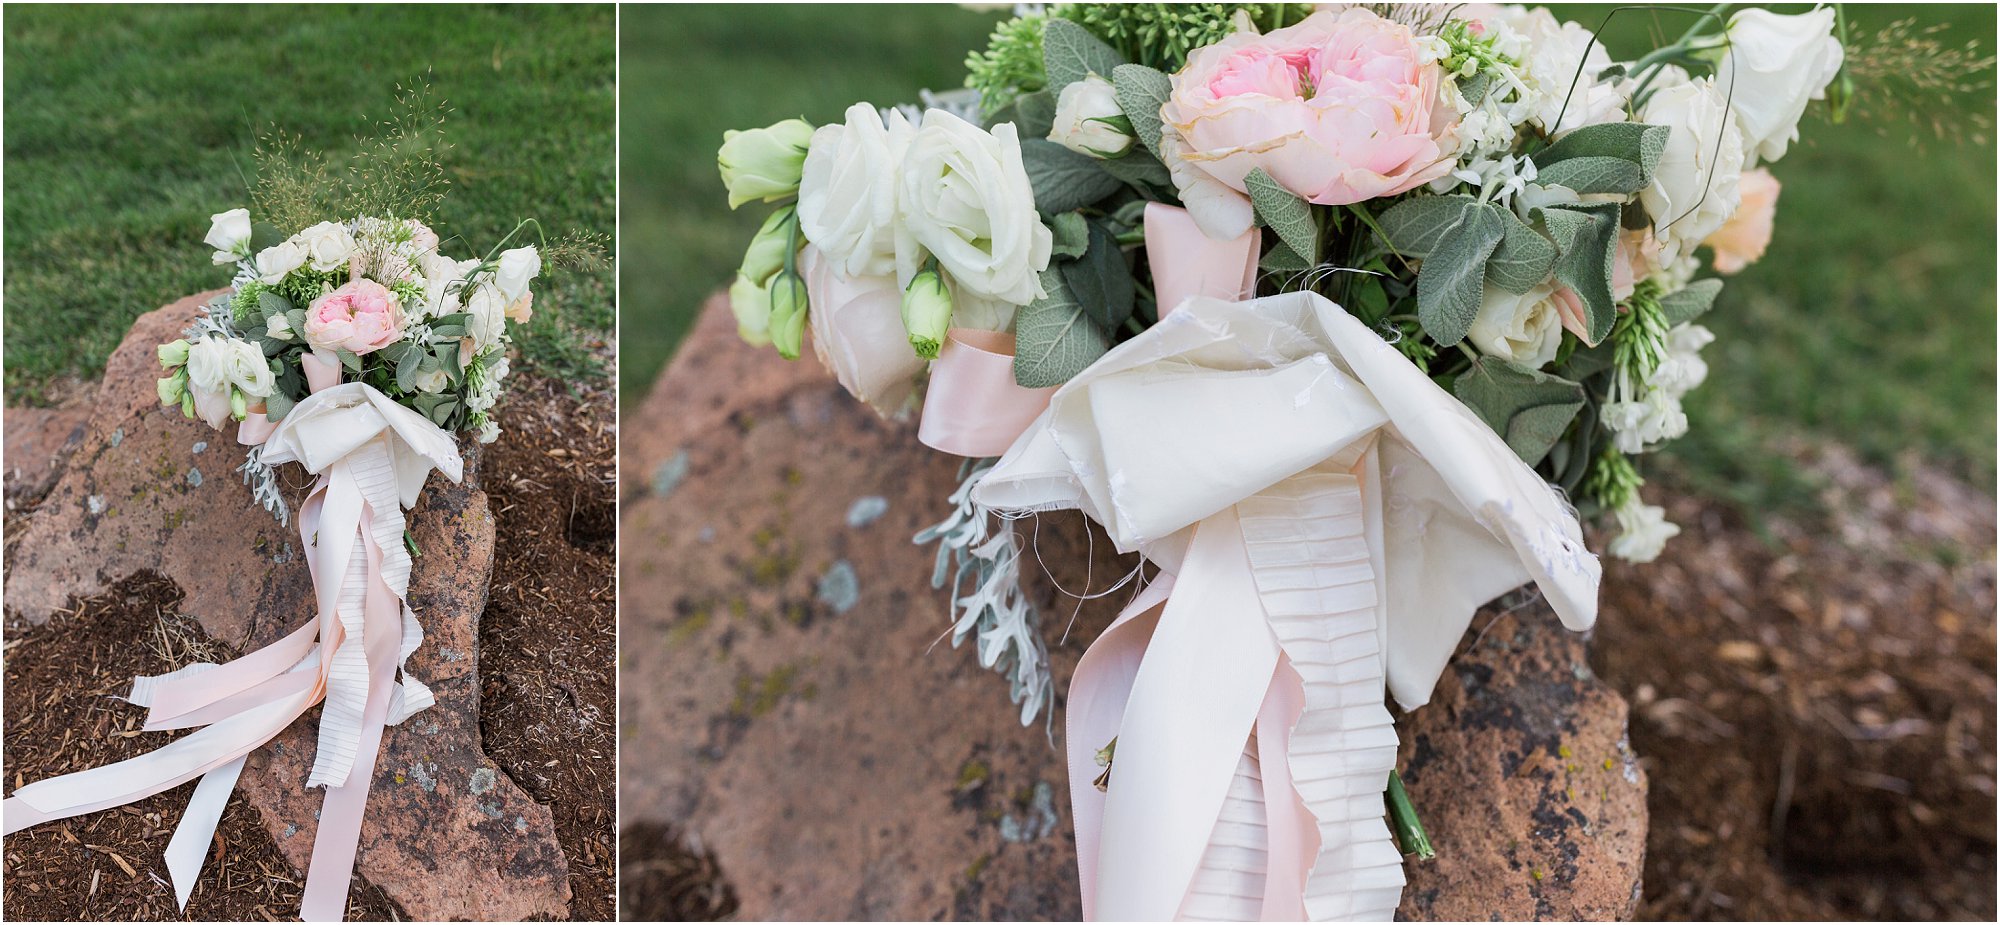 This bride chose to have fabric from her mother's wedding dress incorporated into her gorgeous bouquet created by Heirloom Floral in Bend, OR. | Erica Swantek Photography